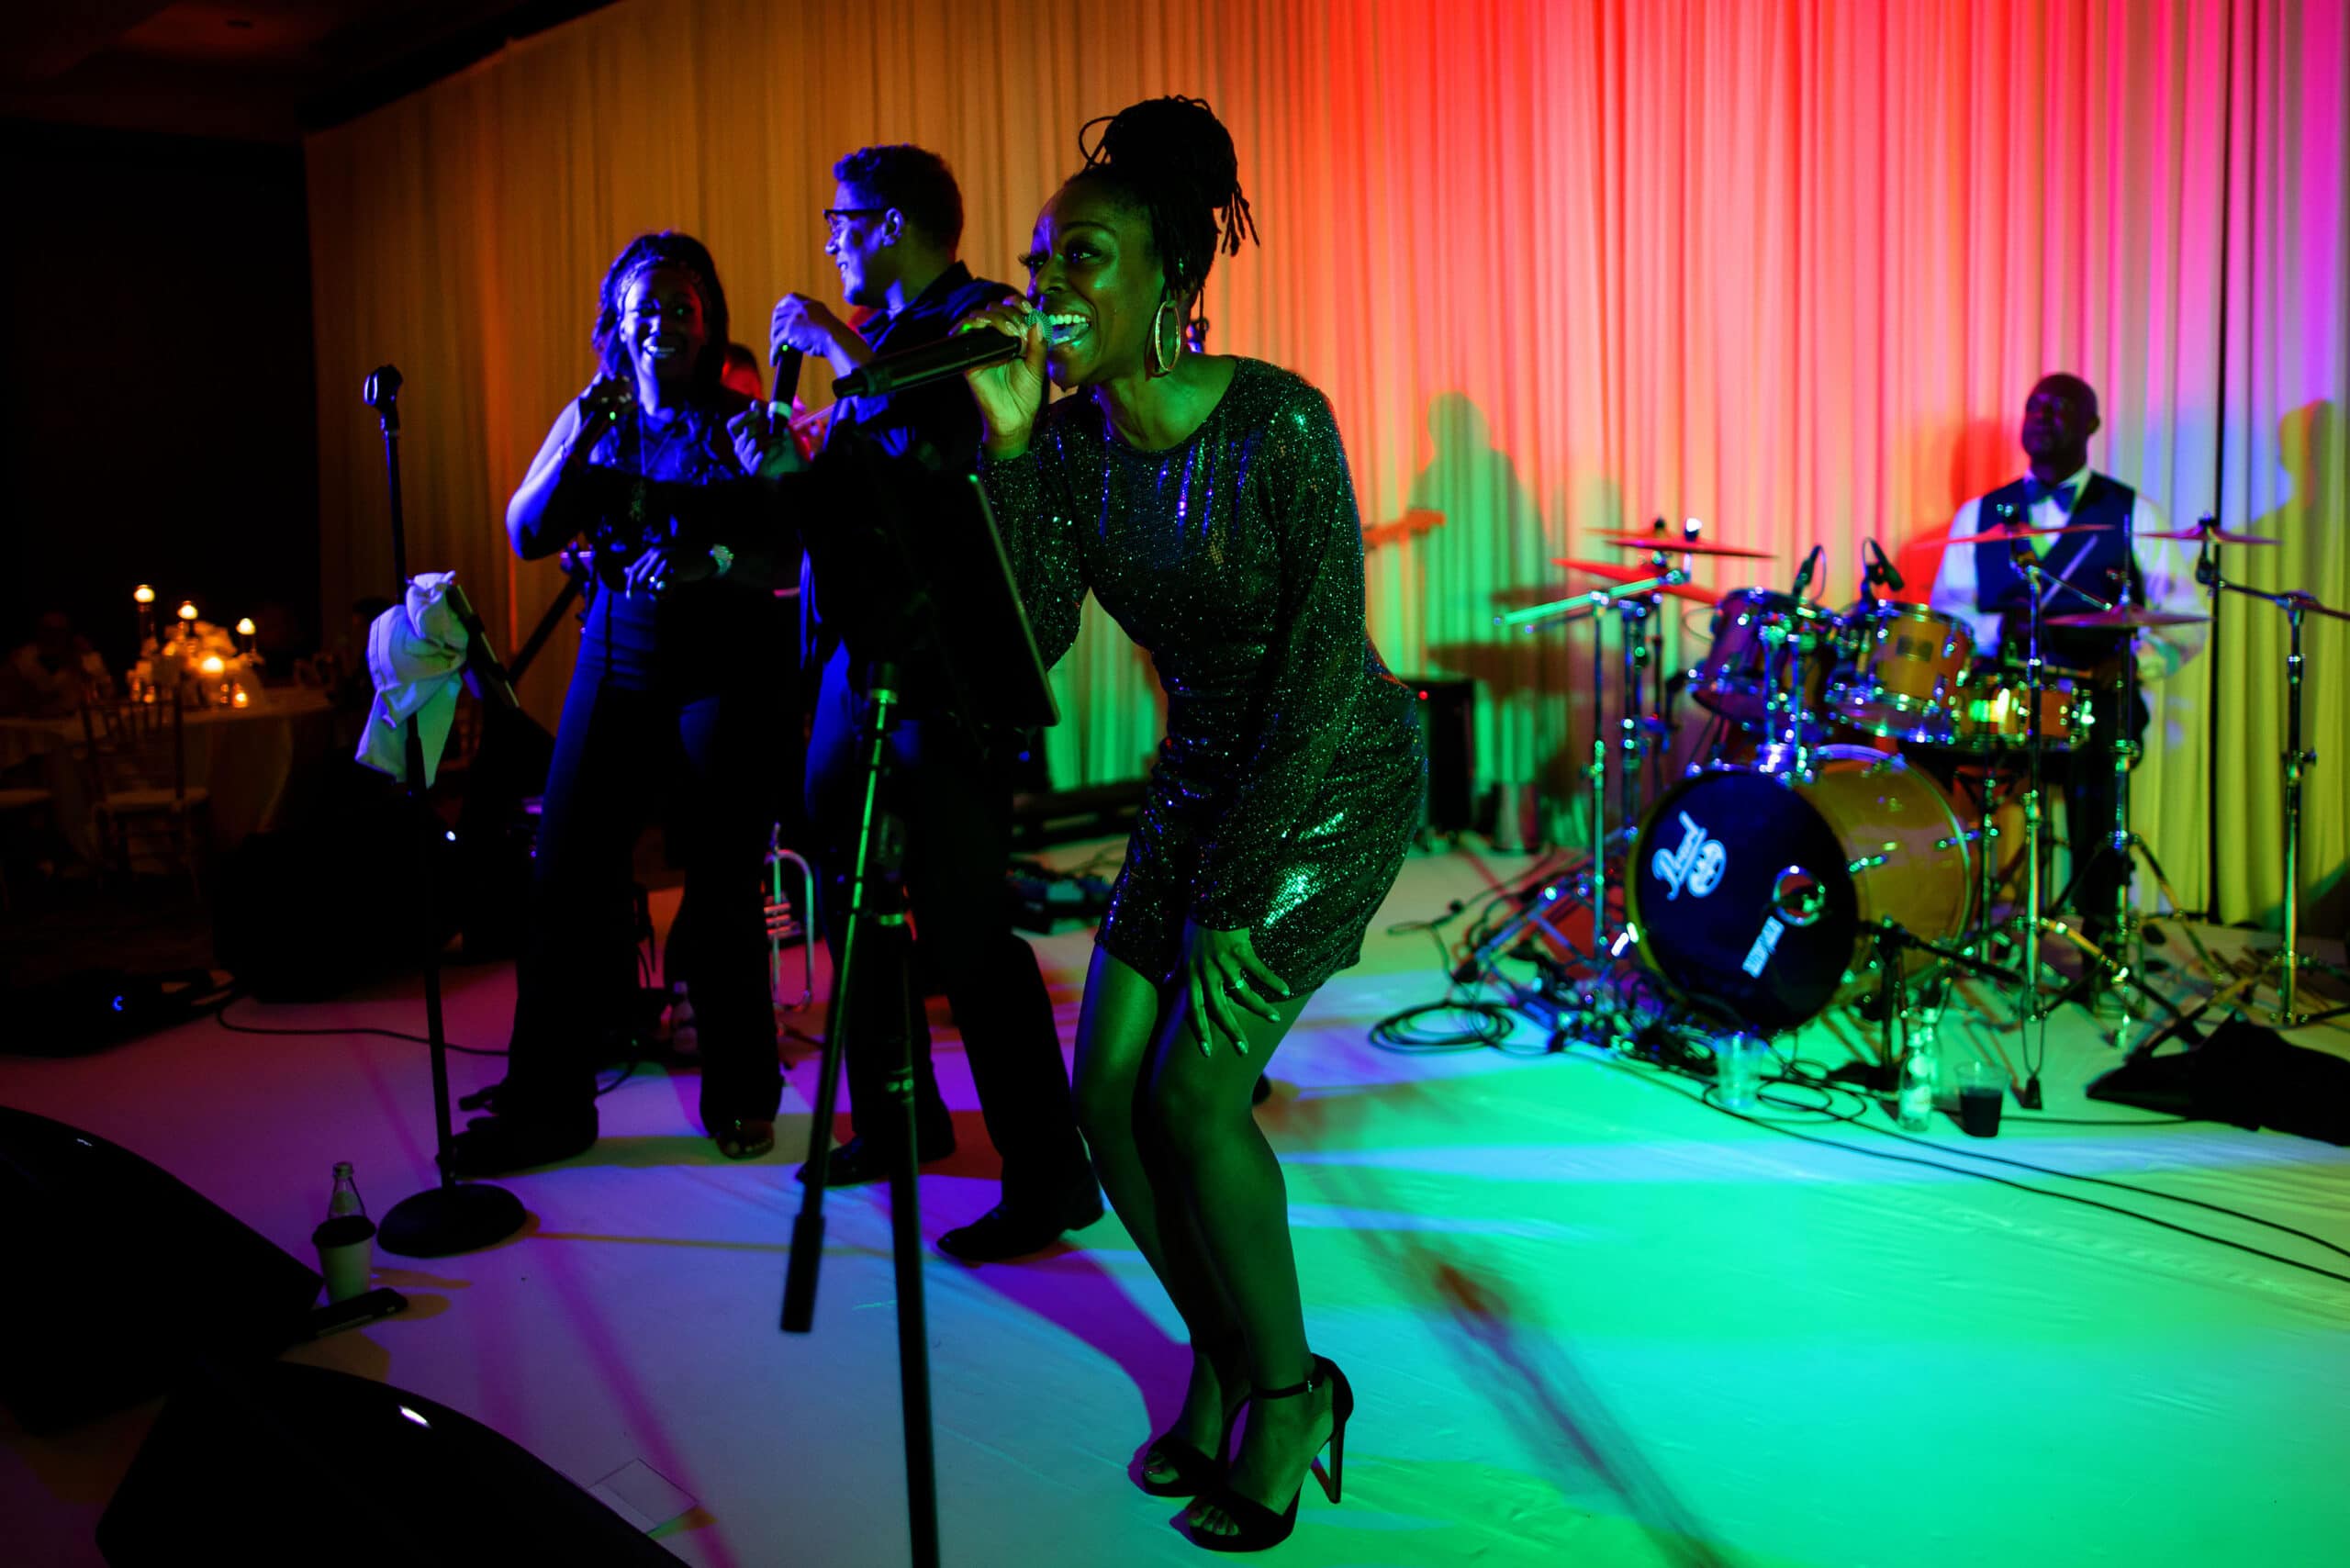 Bounce Band performs during a wedding reception at Four Seasons Hotel Denver